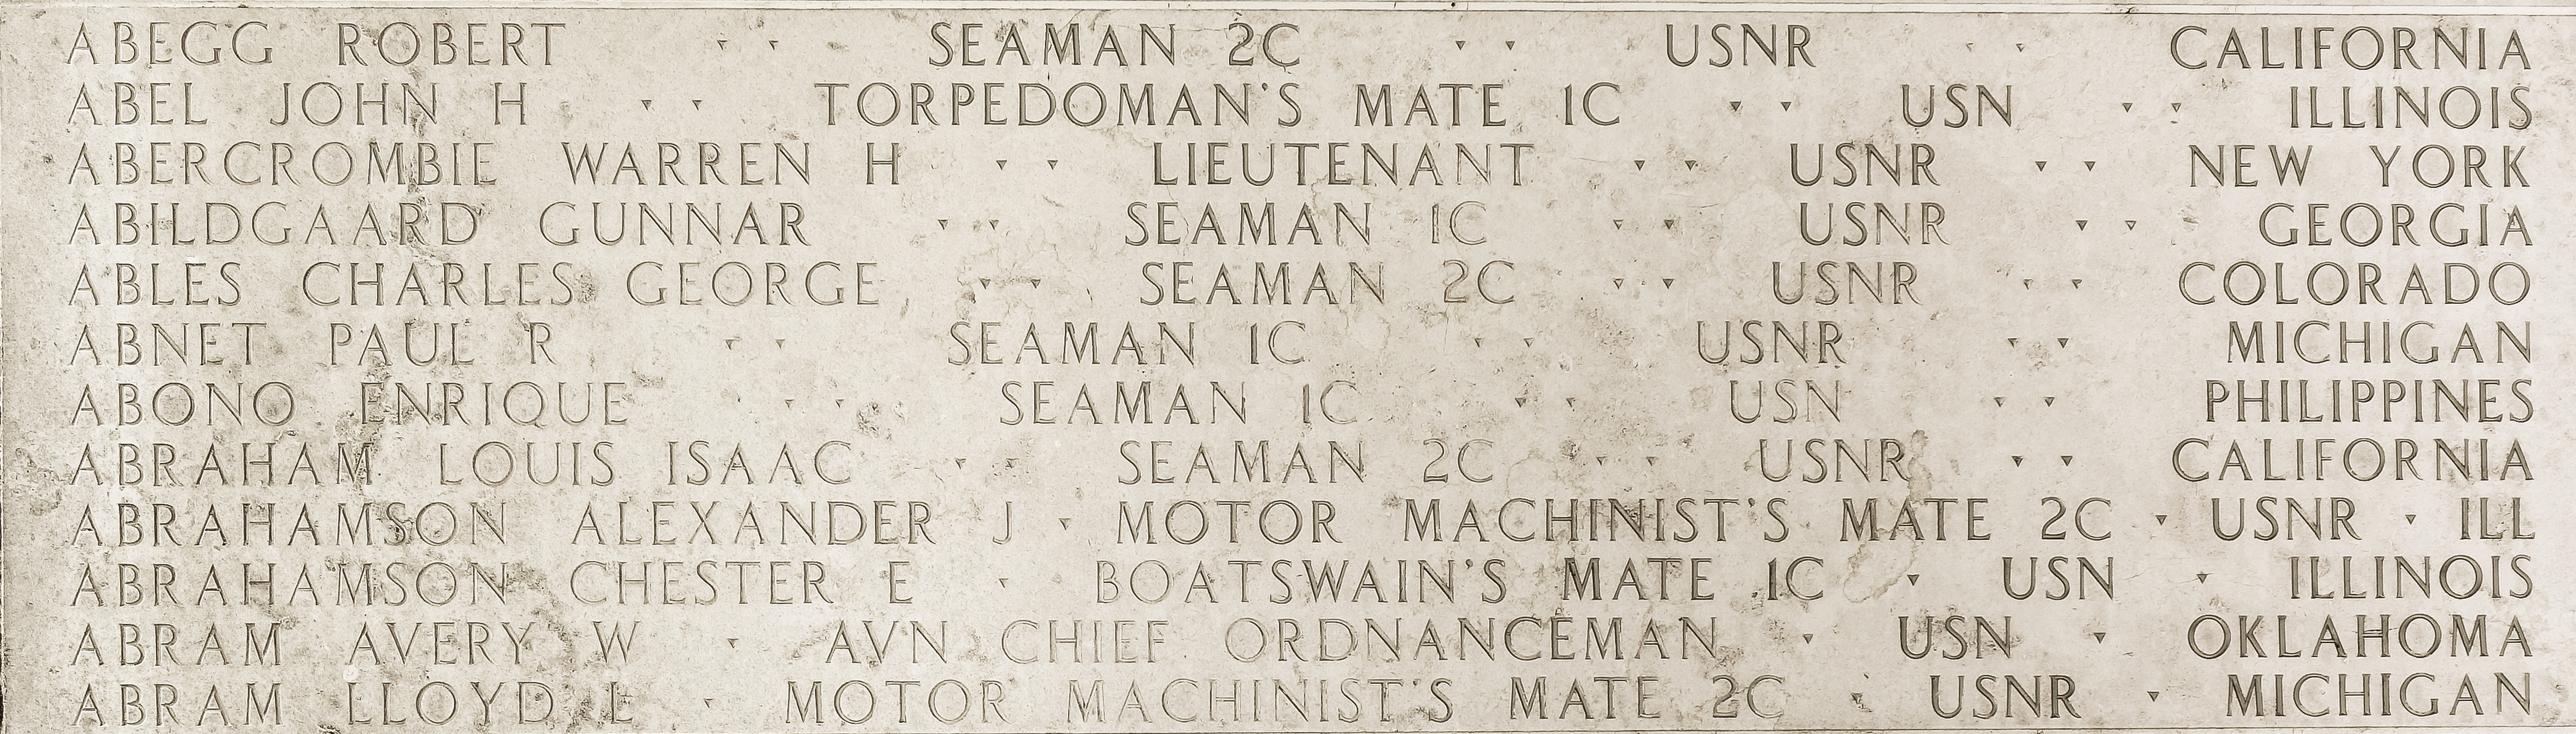 Charles George Ables, Seaman Second Class